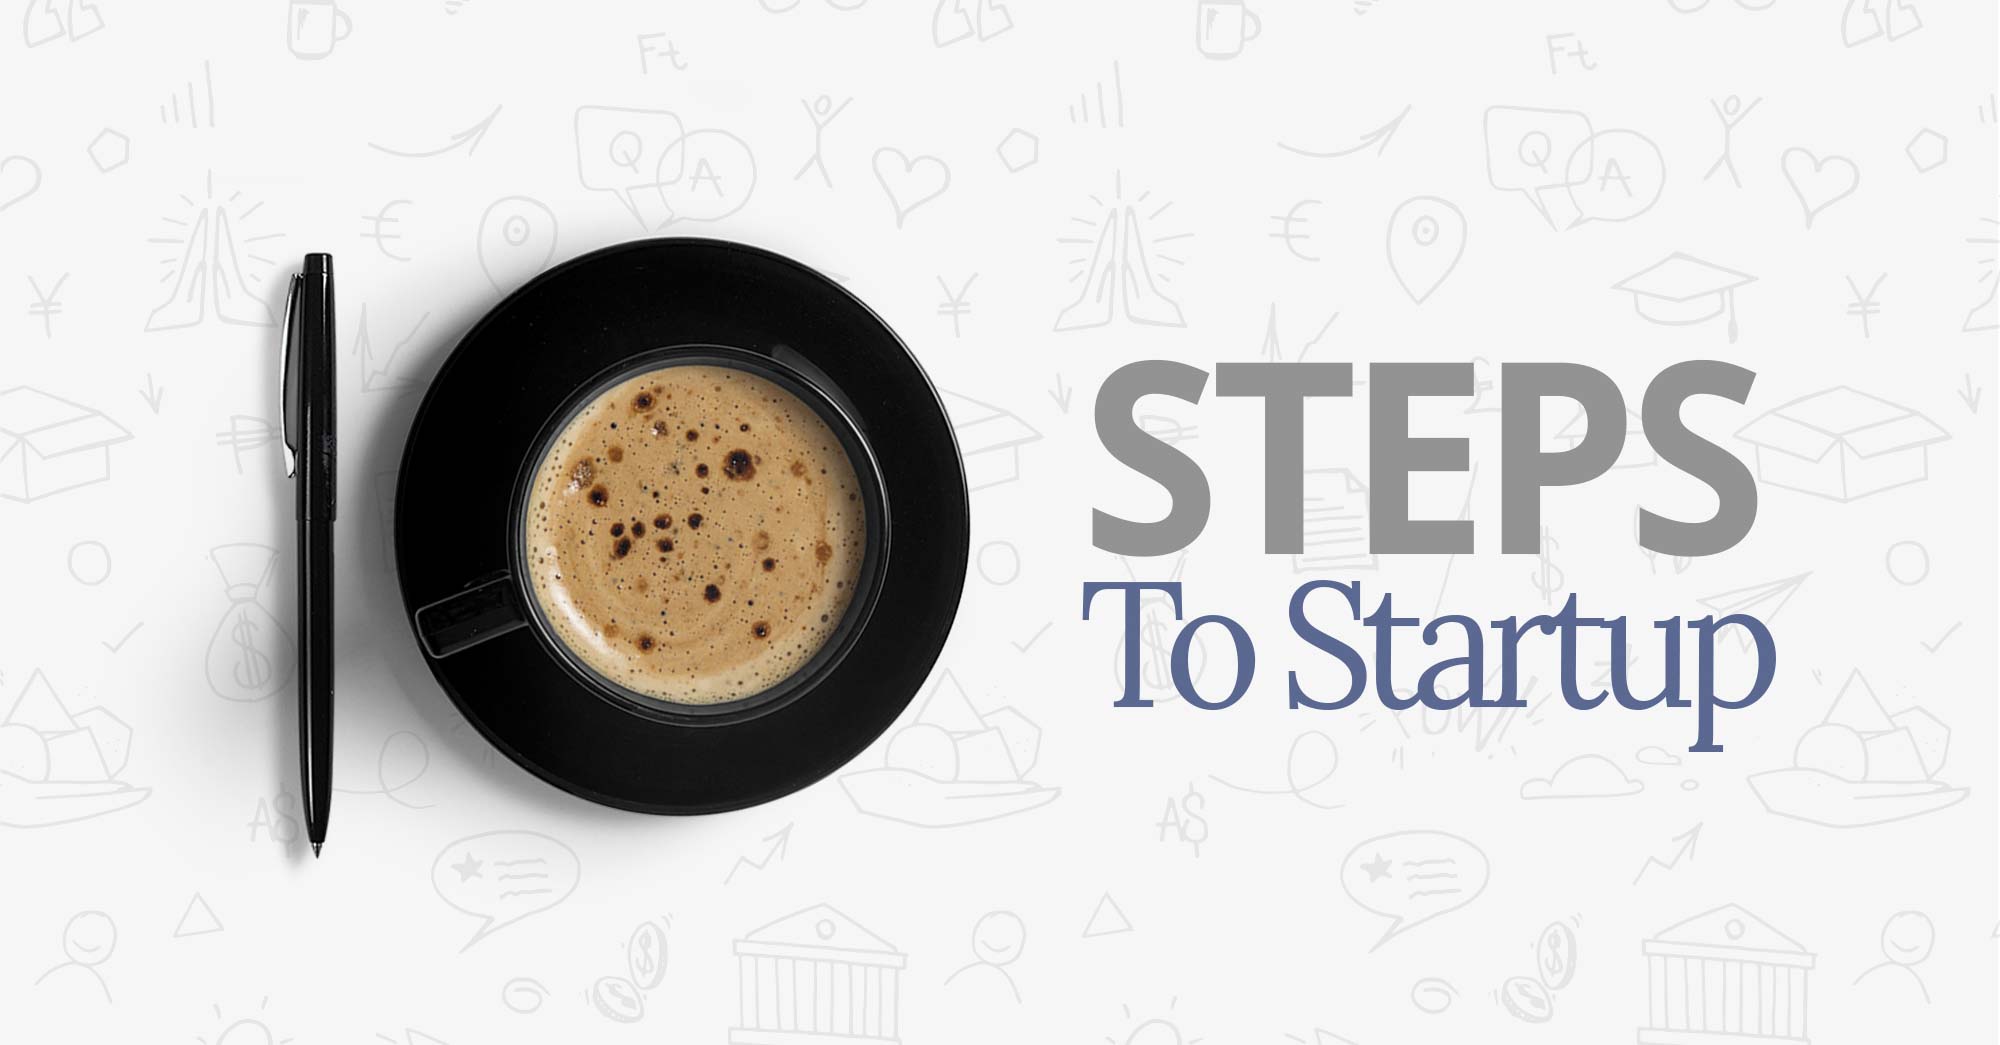 So you’re building a startup: 10 steps to get it right from the start